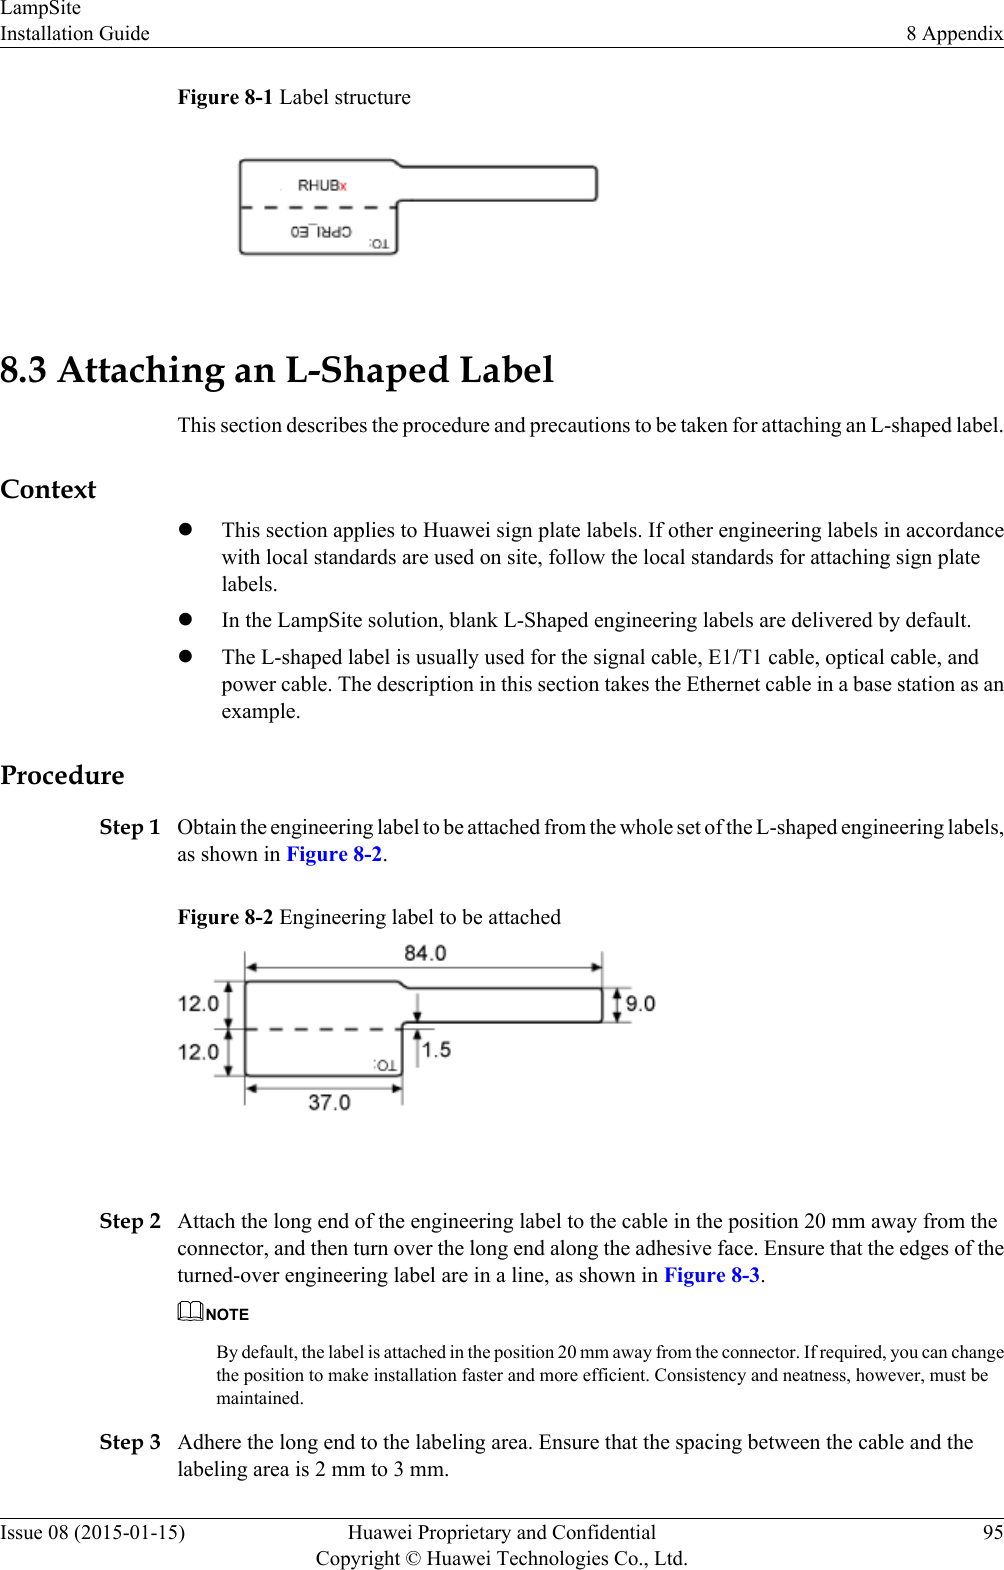 Figure 8-1 Label structure8.3 Attaching an L-Shaped LabelThis section describes the procedure and precautions to be taken for attaching an L-shaped label.ContextlThis section applies to Huawei sign plate labels. If other engineering labels in accordancewith local standards are used on site, follow the local standards for attaching sign platelabels.lIn the LampSite solution, blank L-Shaped engineering labels are delivered by default.lThe L-shaped label is usually used for the signal cable, E1/T1 cable, optical cable, andpower cable. The description in this section takes the Ethernet cable in a base station as anexample.ProcedureStep 1 Obtain the engineering label to be attached from the whole set of the L-shaped engineering labels,as shown in Figure 8-2.Figure 8-2 Engineering label to be attached Step 2 Attach the long end of the engineering label to the cable in the position 20 mm away from theconnector, and then turn over the long end along the adhesive face. Ensure that the edges of theturned-over engineering label are in a line, as shown in Figure 8-3.NOTEBy default, the label is attached in the position 20 mm away from the connector. If required, you can changethe position to make installation faster and more efficient. Consistency and neatness, however, must bemaintained.Step 3 Adhere the long end to the labeling area. Ensure that the spacing between the cable and thelabeling area is 2 mm to 3 mm.LampSiteInstallation Guide 8 AppendixIssue 08 (2015-01-15) Huawei Proprietary and ConfidentialCopyright © Huawei Technologies Co., Ltd.95